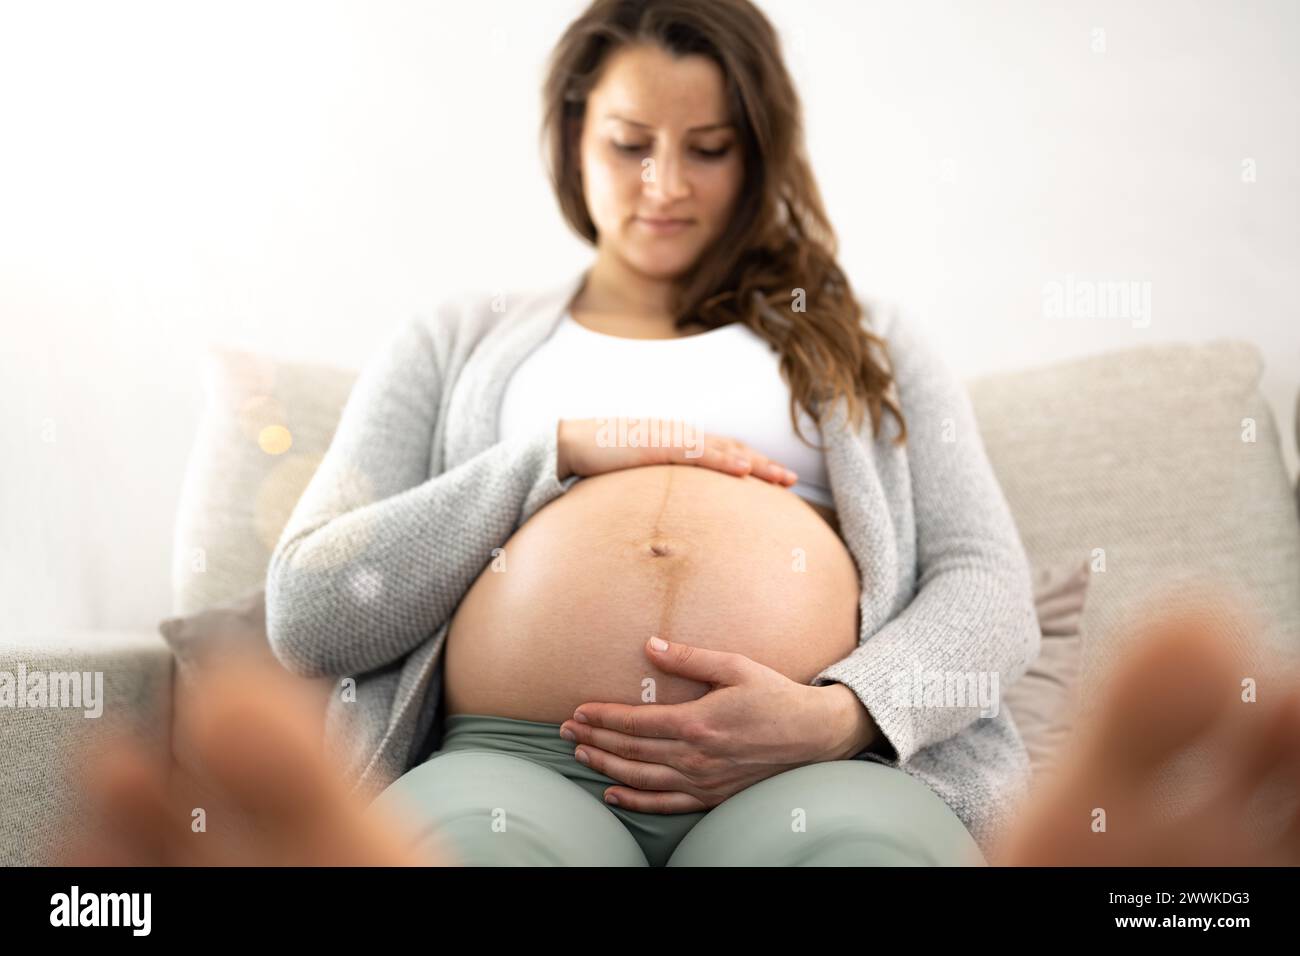 Description: Frontal view of woman sitting on a sofa gently holding her belly in expectation of the baby during the last stage of pregnancy. Pregnancy Stock Photo